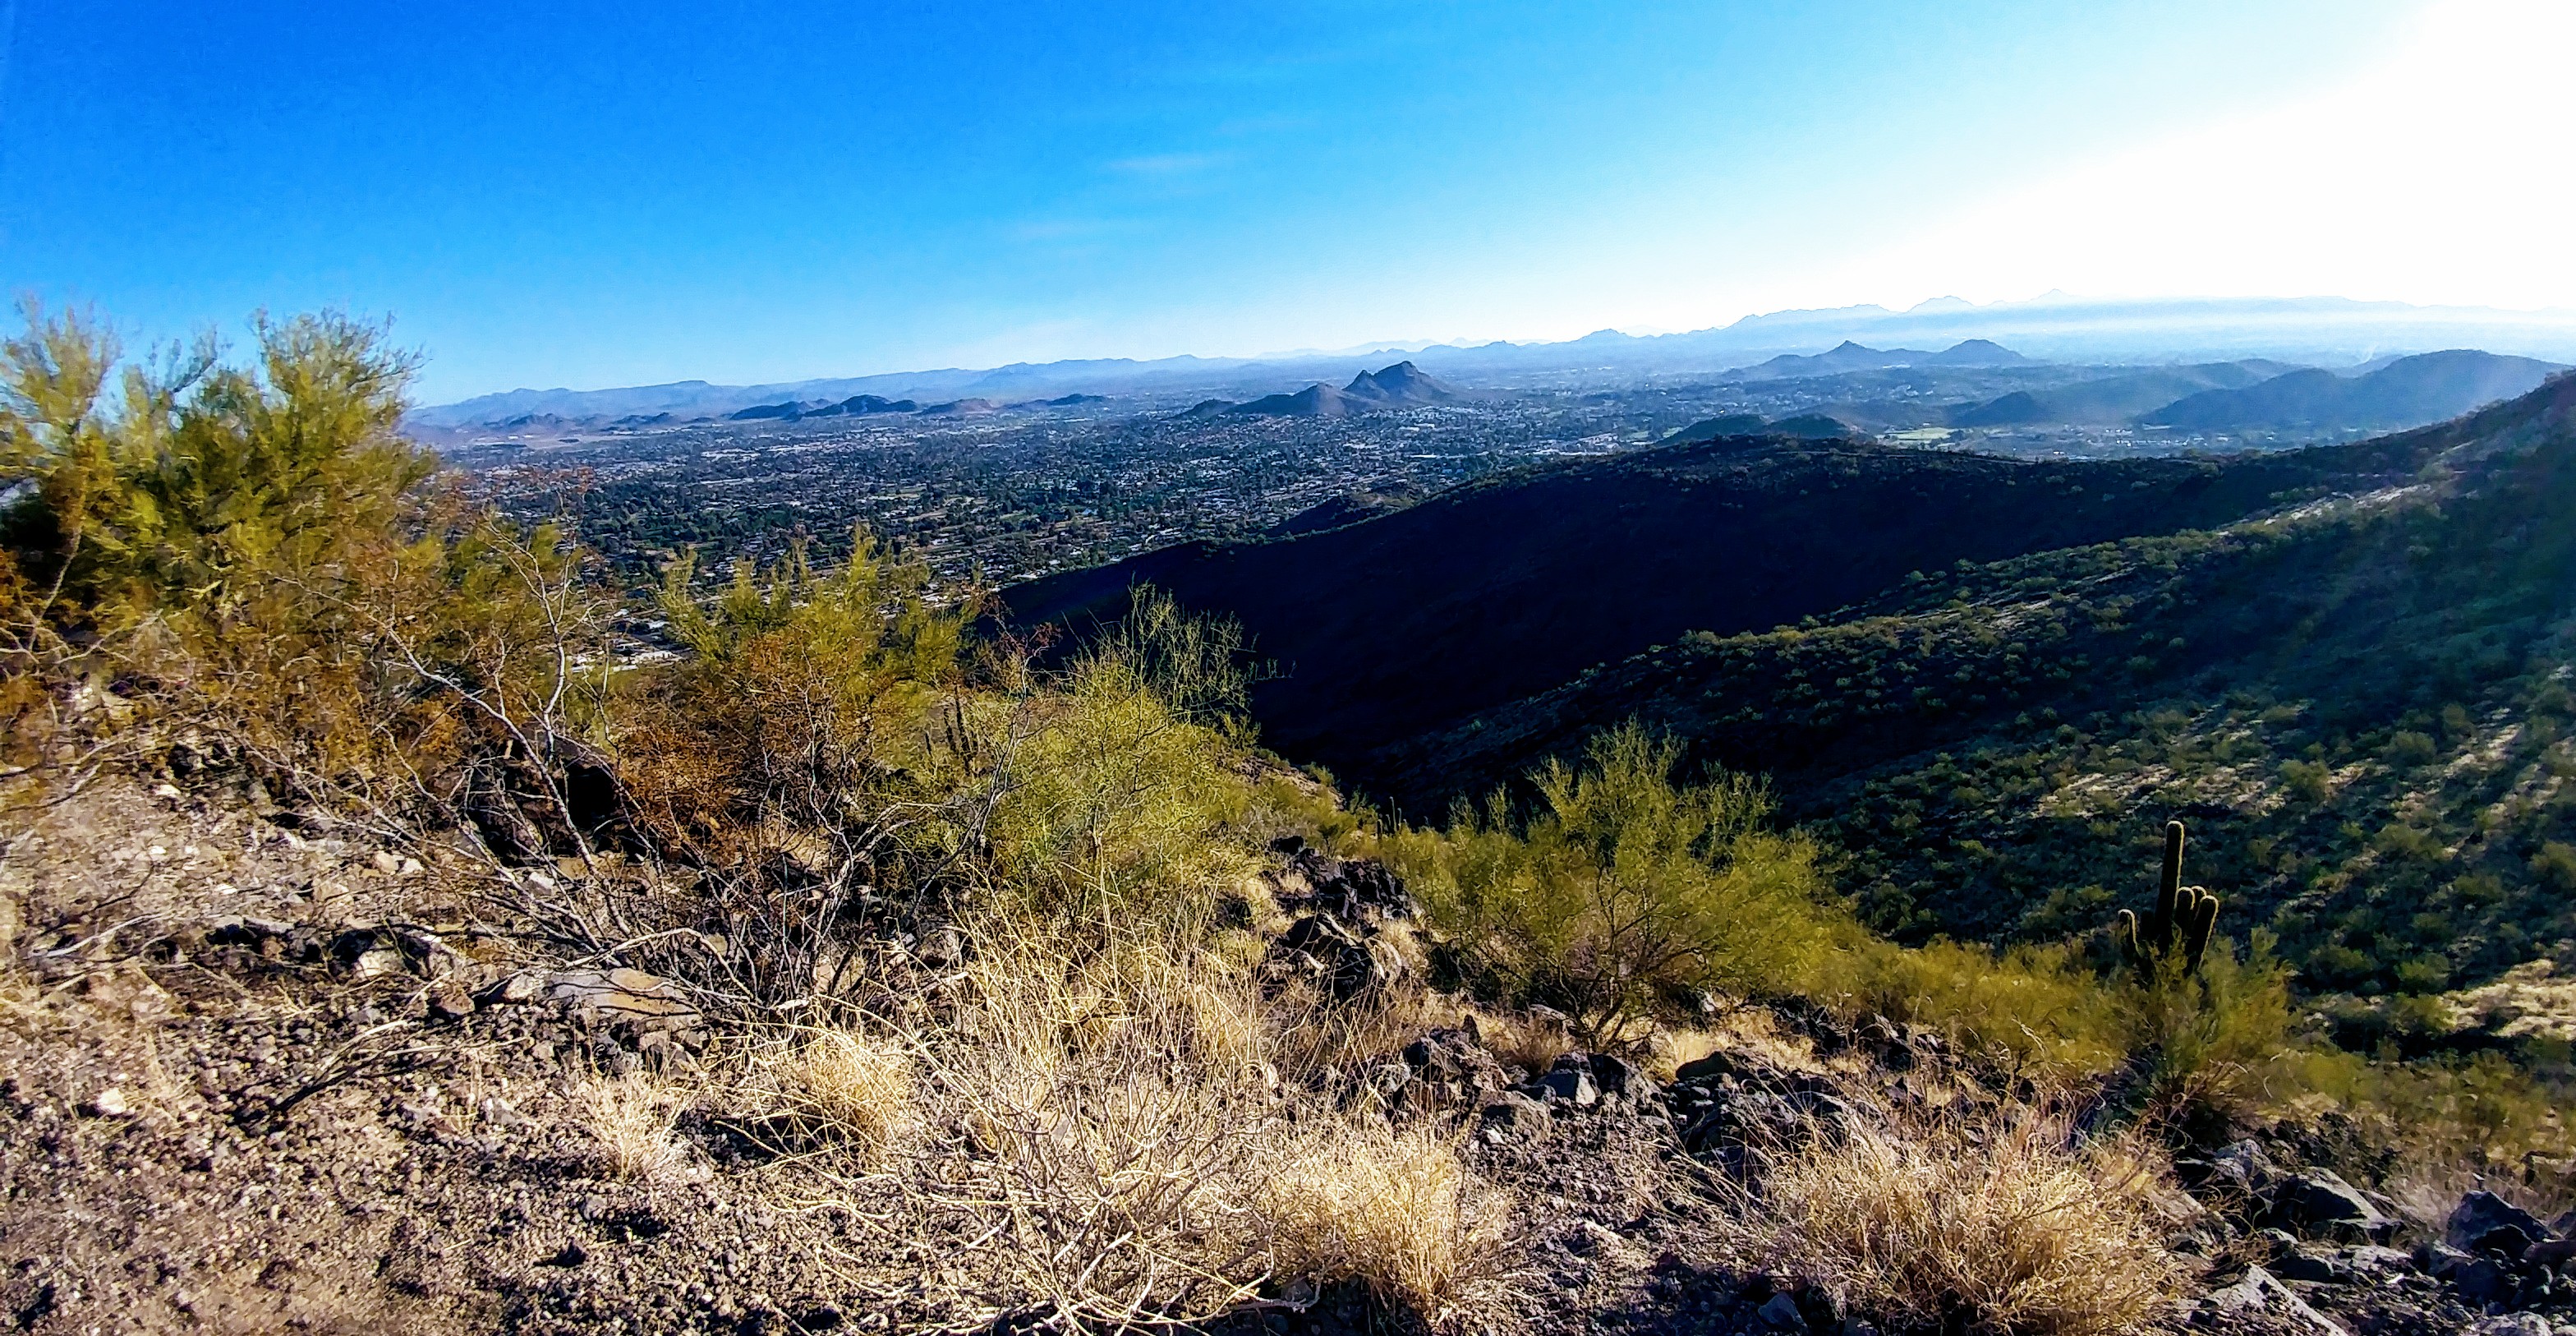 Looking toward Superstition Mountains